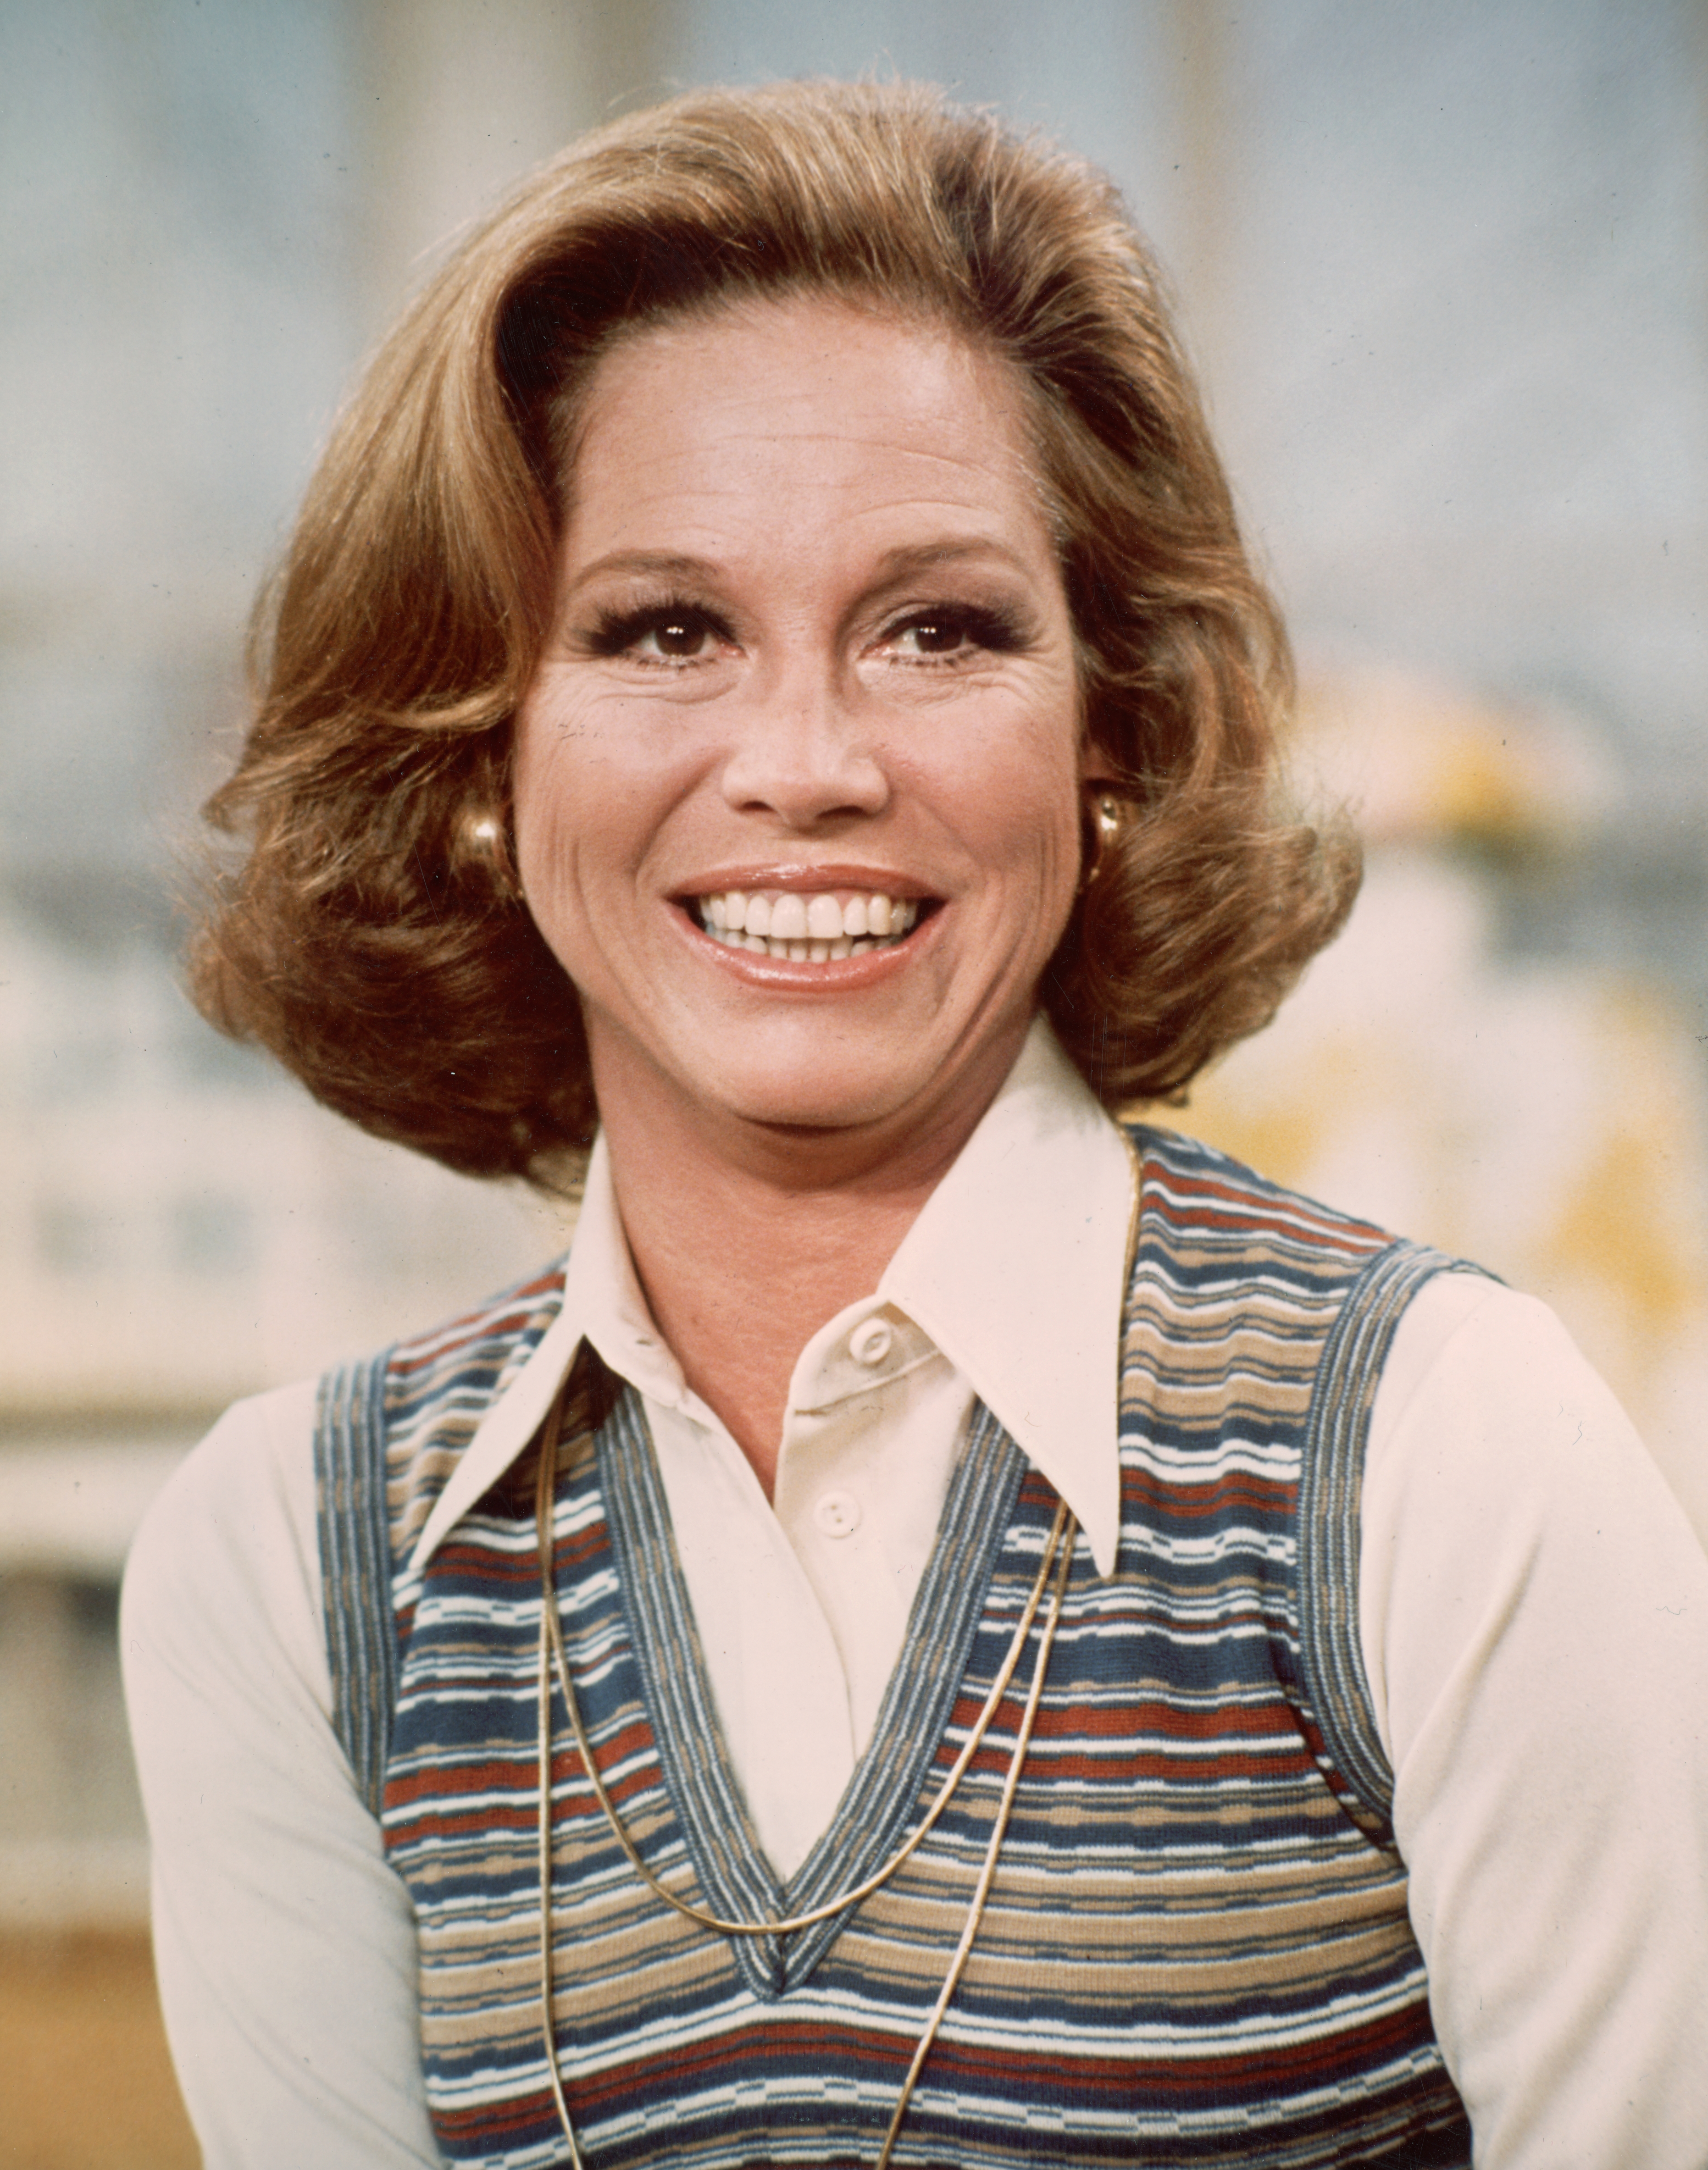 Mary Tyler Moore on "The Mary Tyler Moore Show" in 1977 | Source: Getty Images